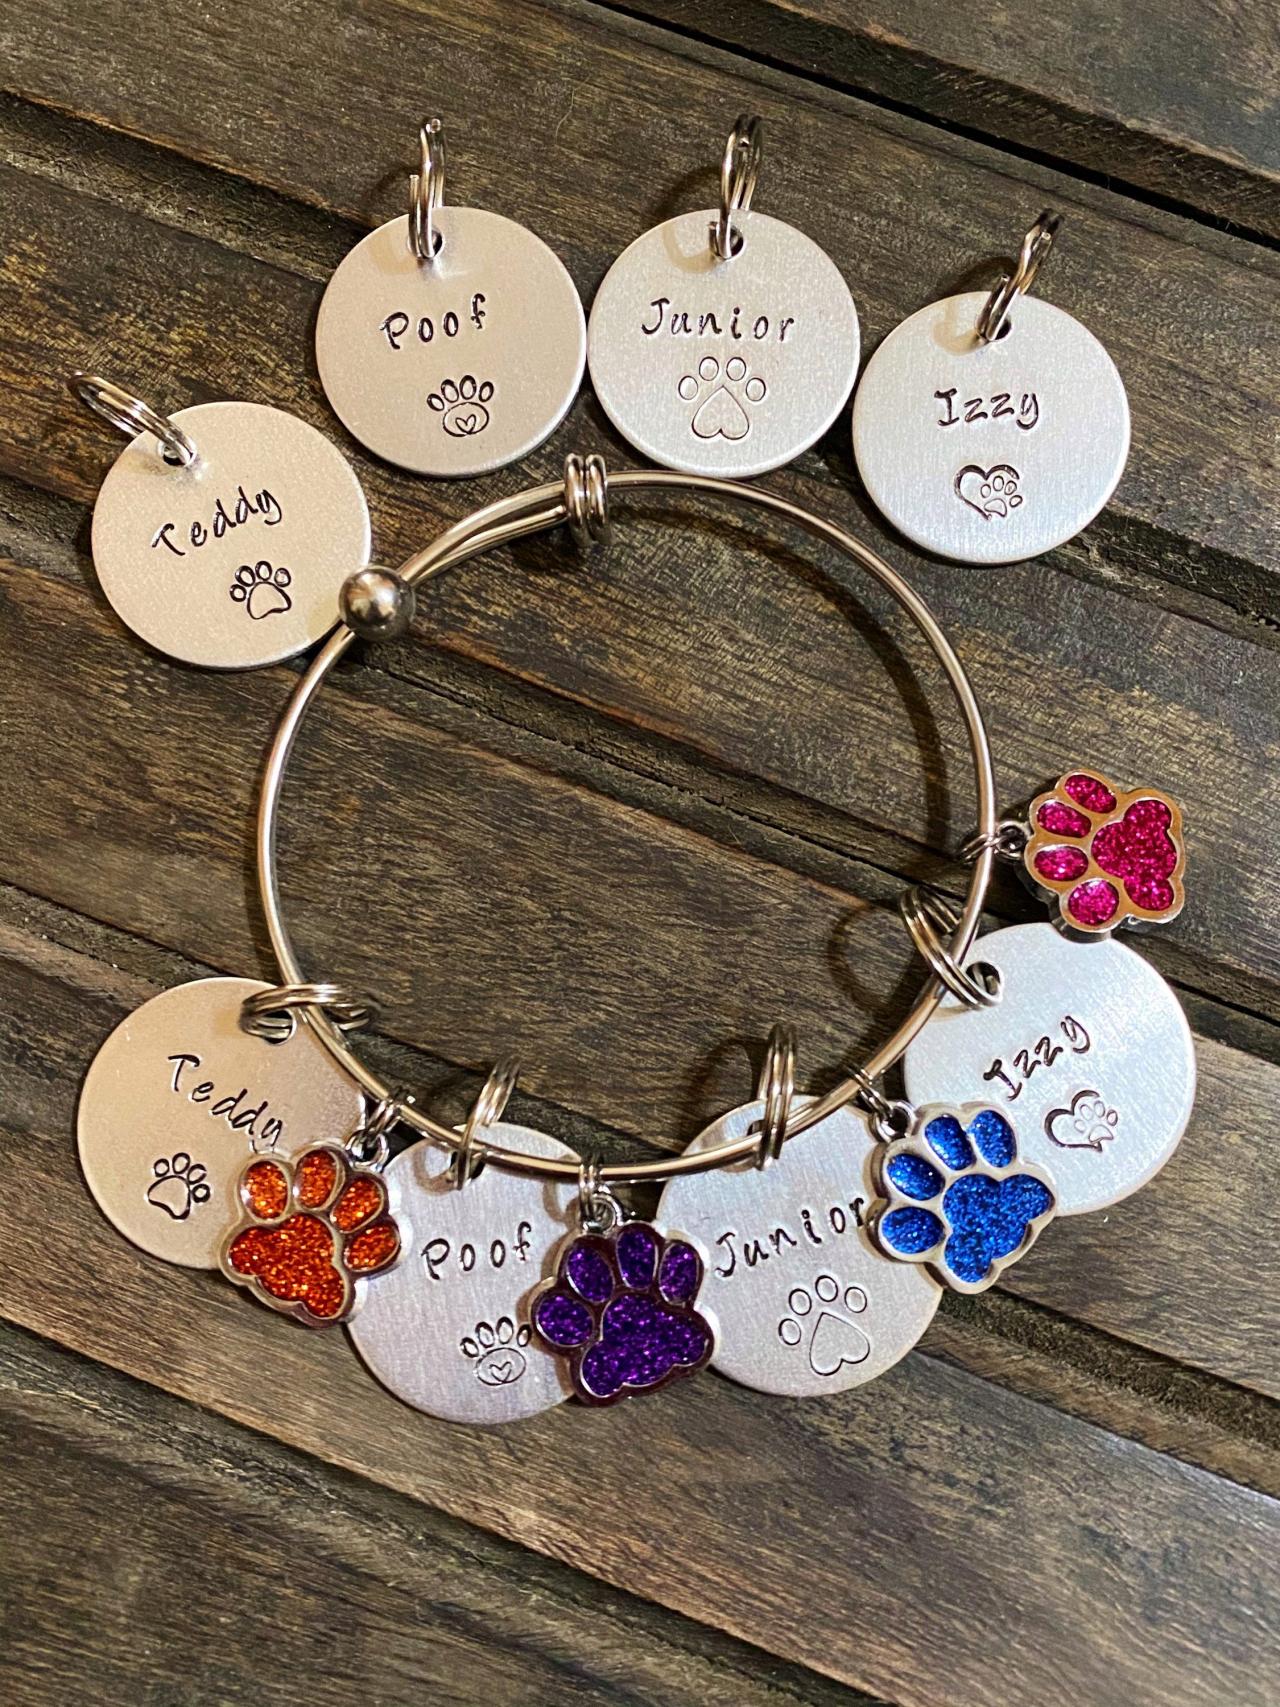 PERSONALIZED BRACELET & TAG, Combo Fur Baby Bracelet with name tag, Dog or Cat Mom gift, Custom Hand Stamped gift